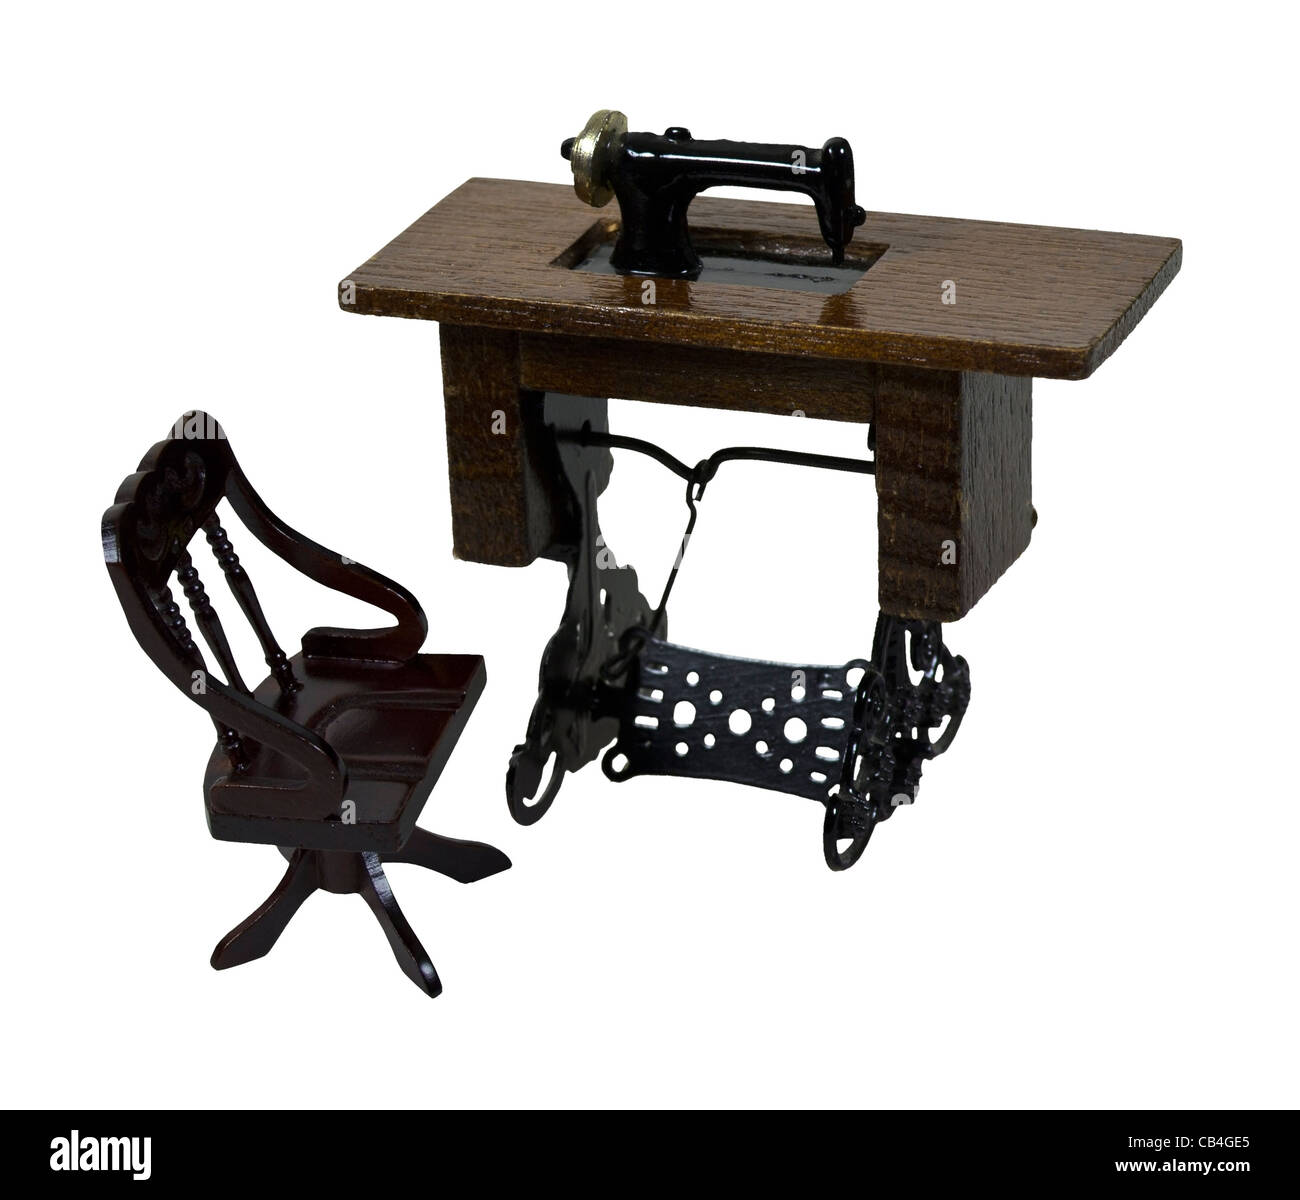 Old Antique Manual Sewing Machine Pedal Stock Photo 1444249742